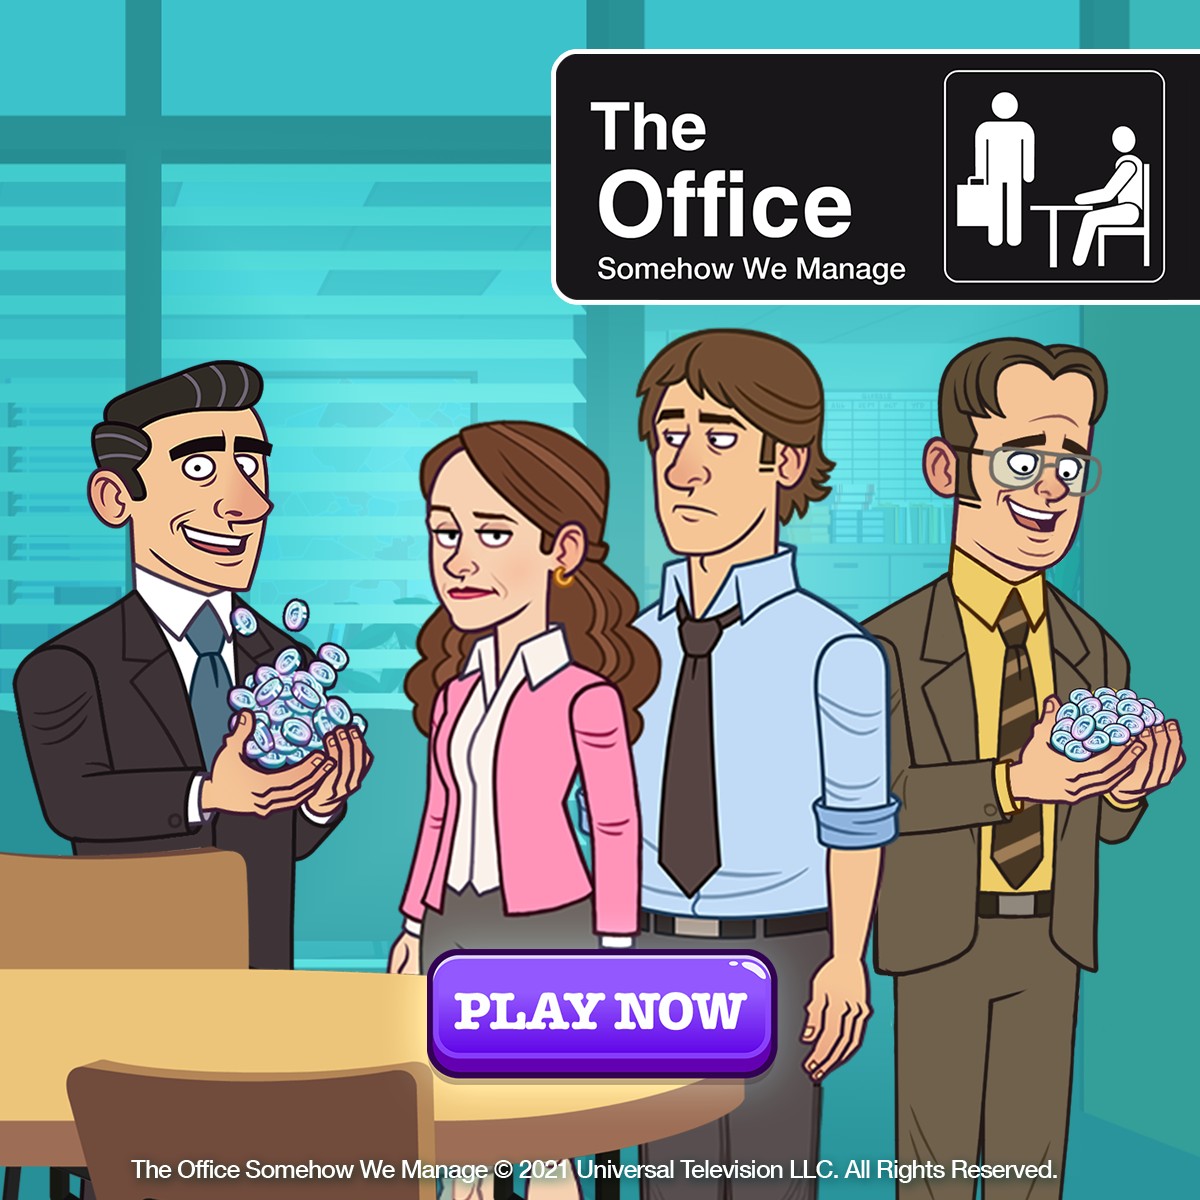 The Office: Somehow We Manage hit Mobile Stores this week 19